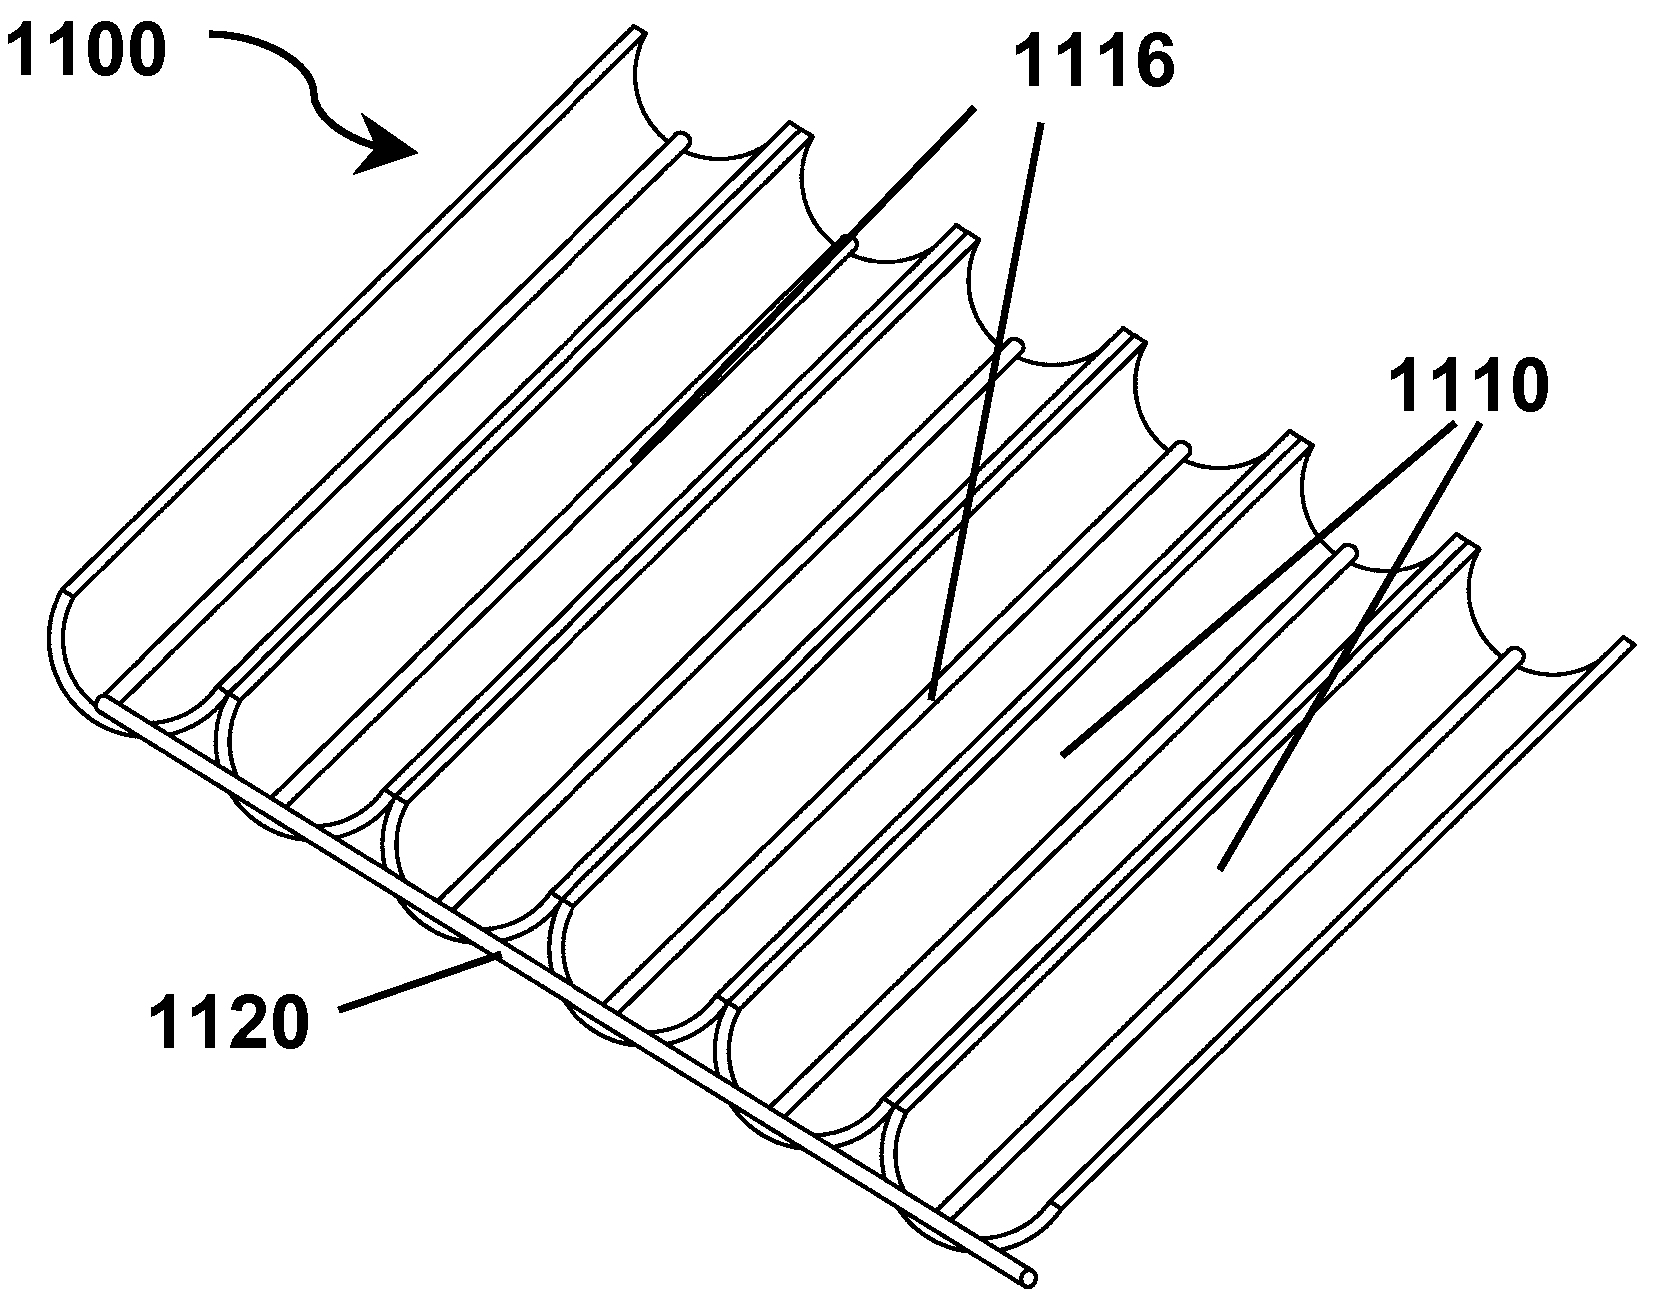 Bandgap-shifted semiconductor surface and method for making same, and apparatus for using same